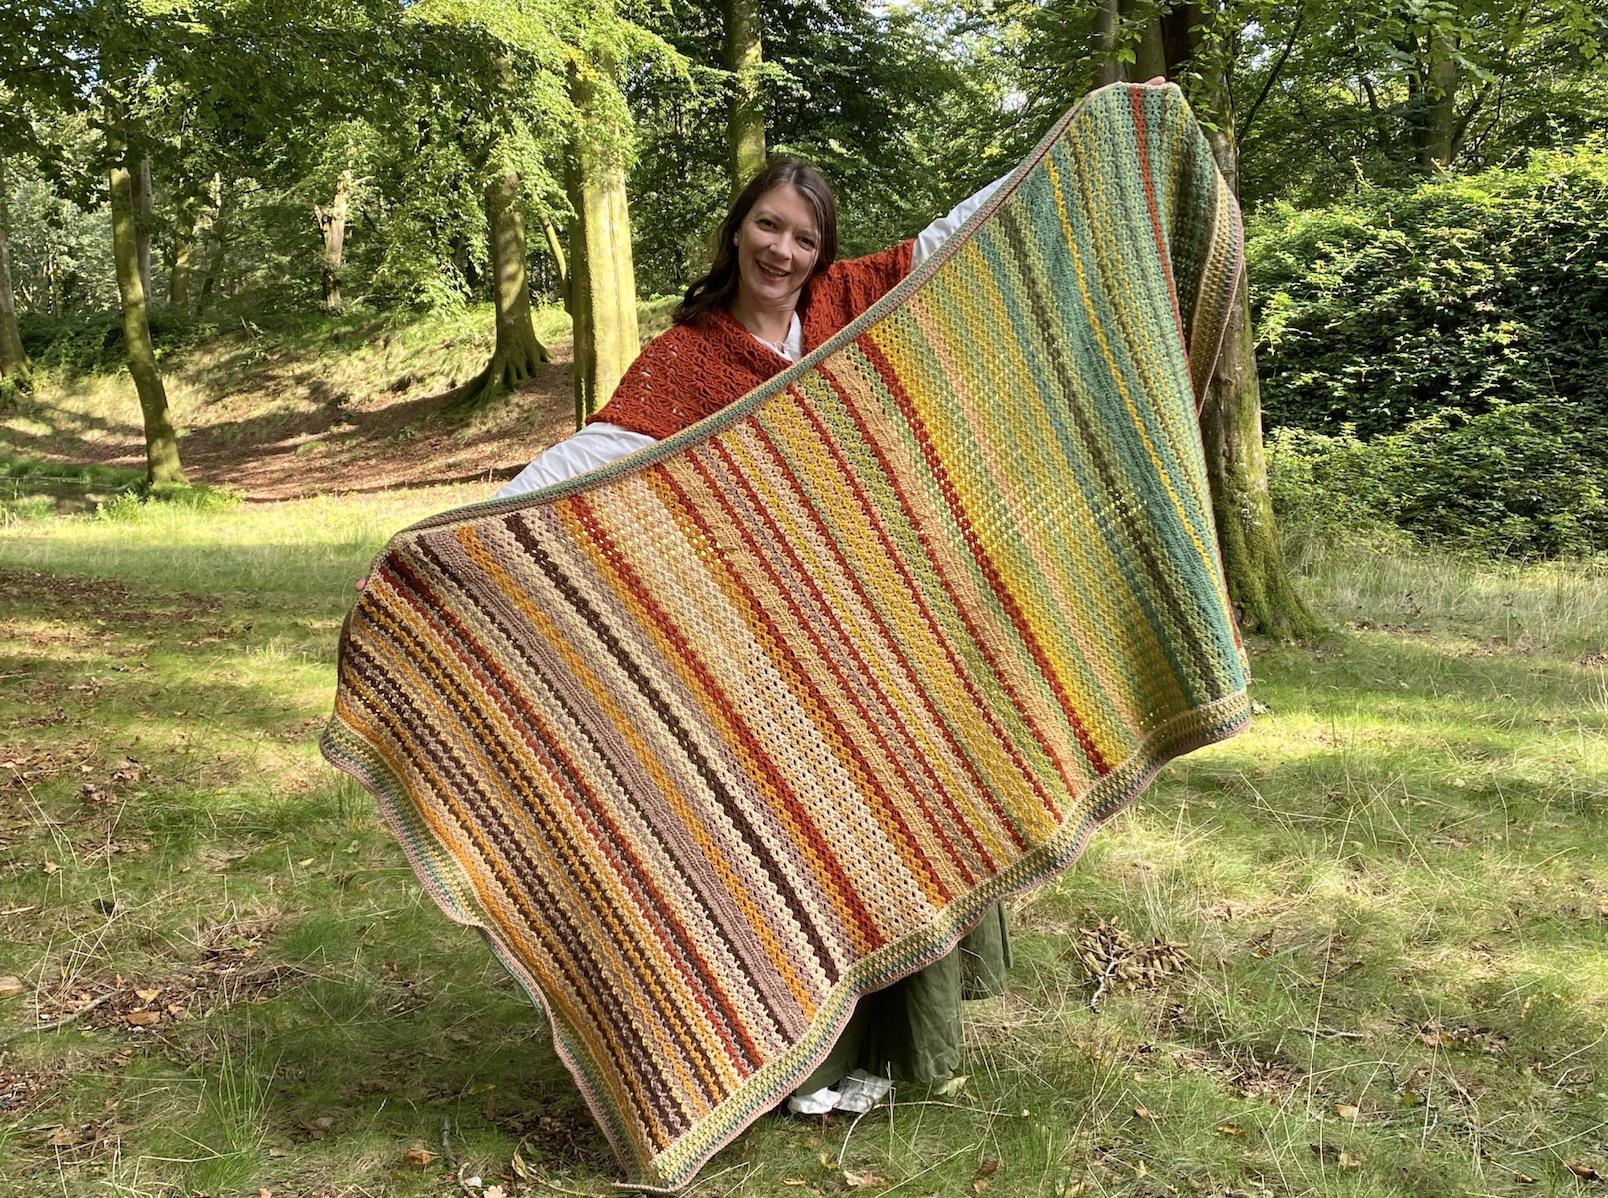 Ophelia showing the complete blanket